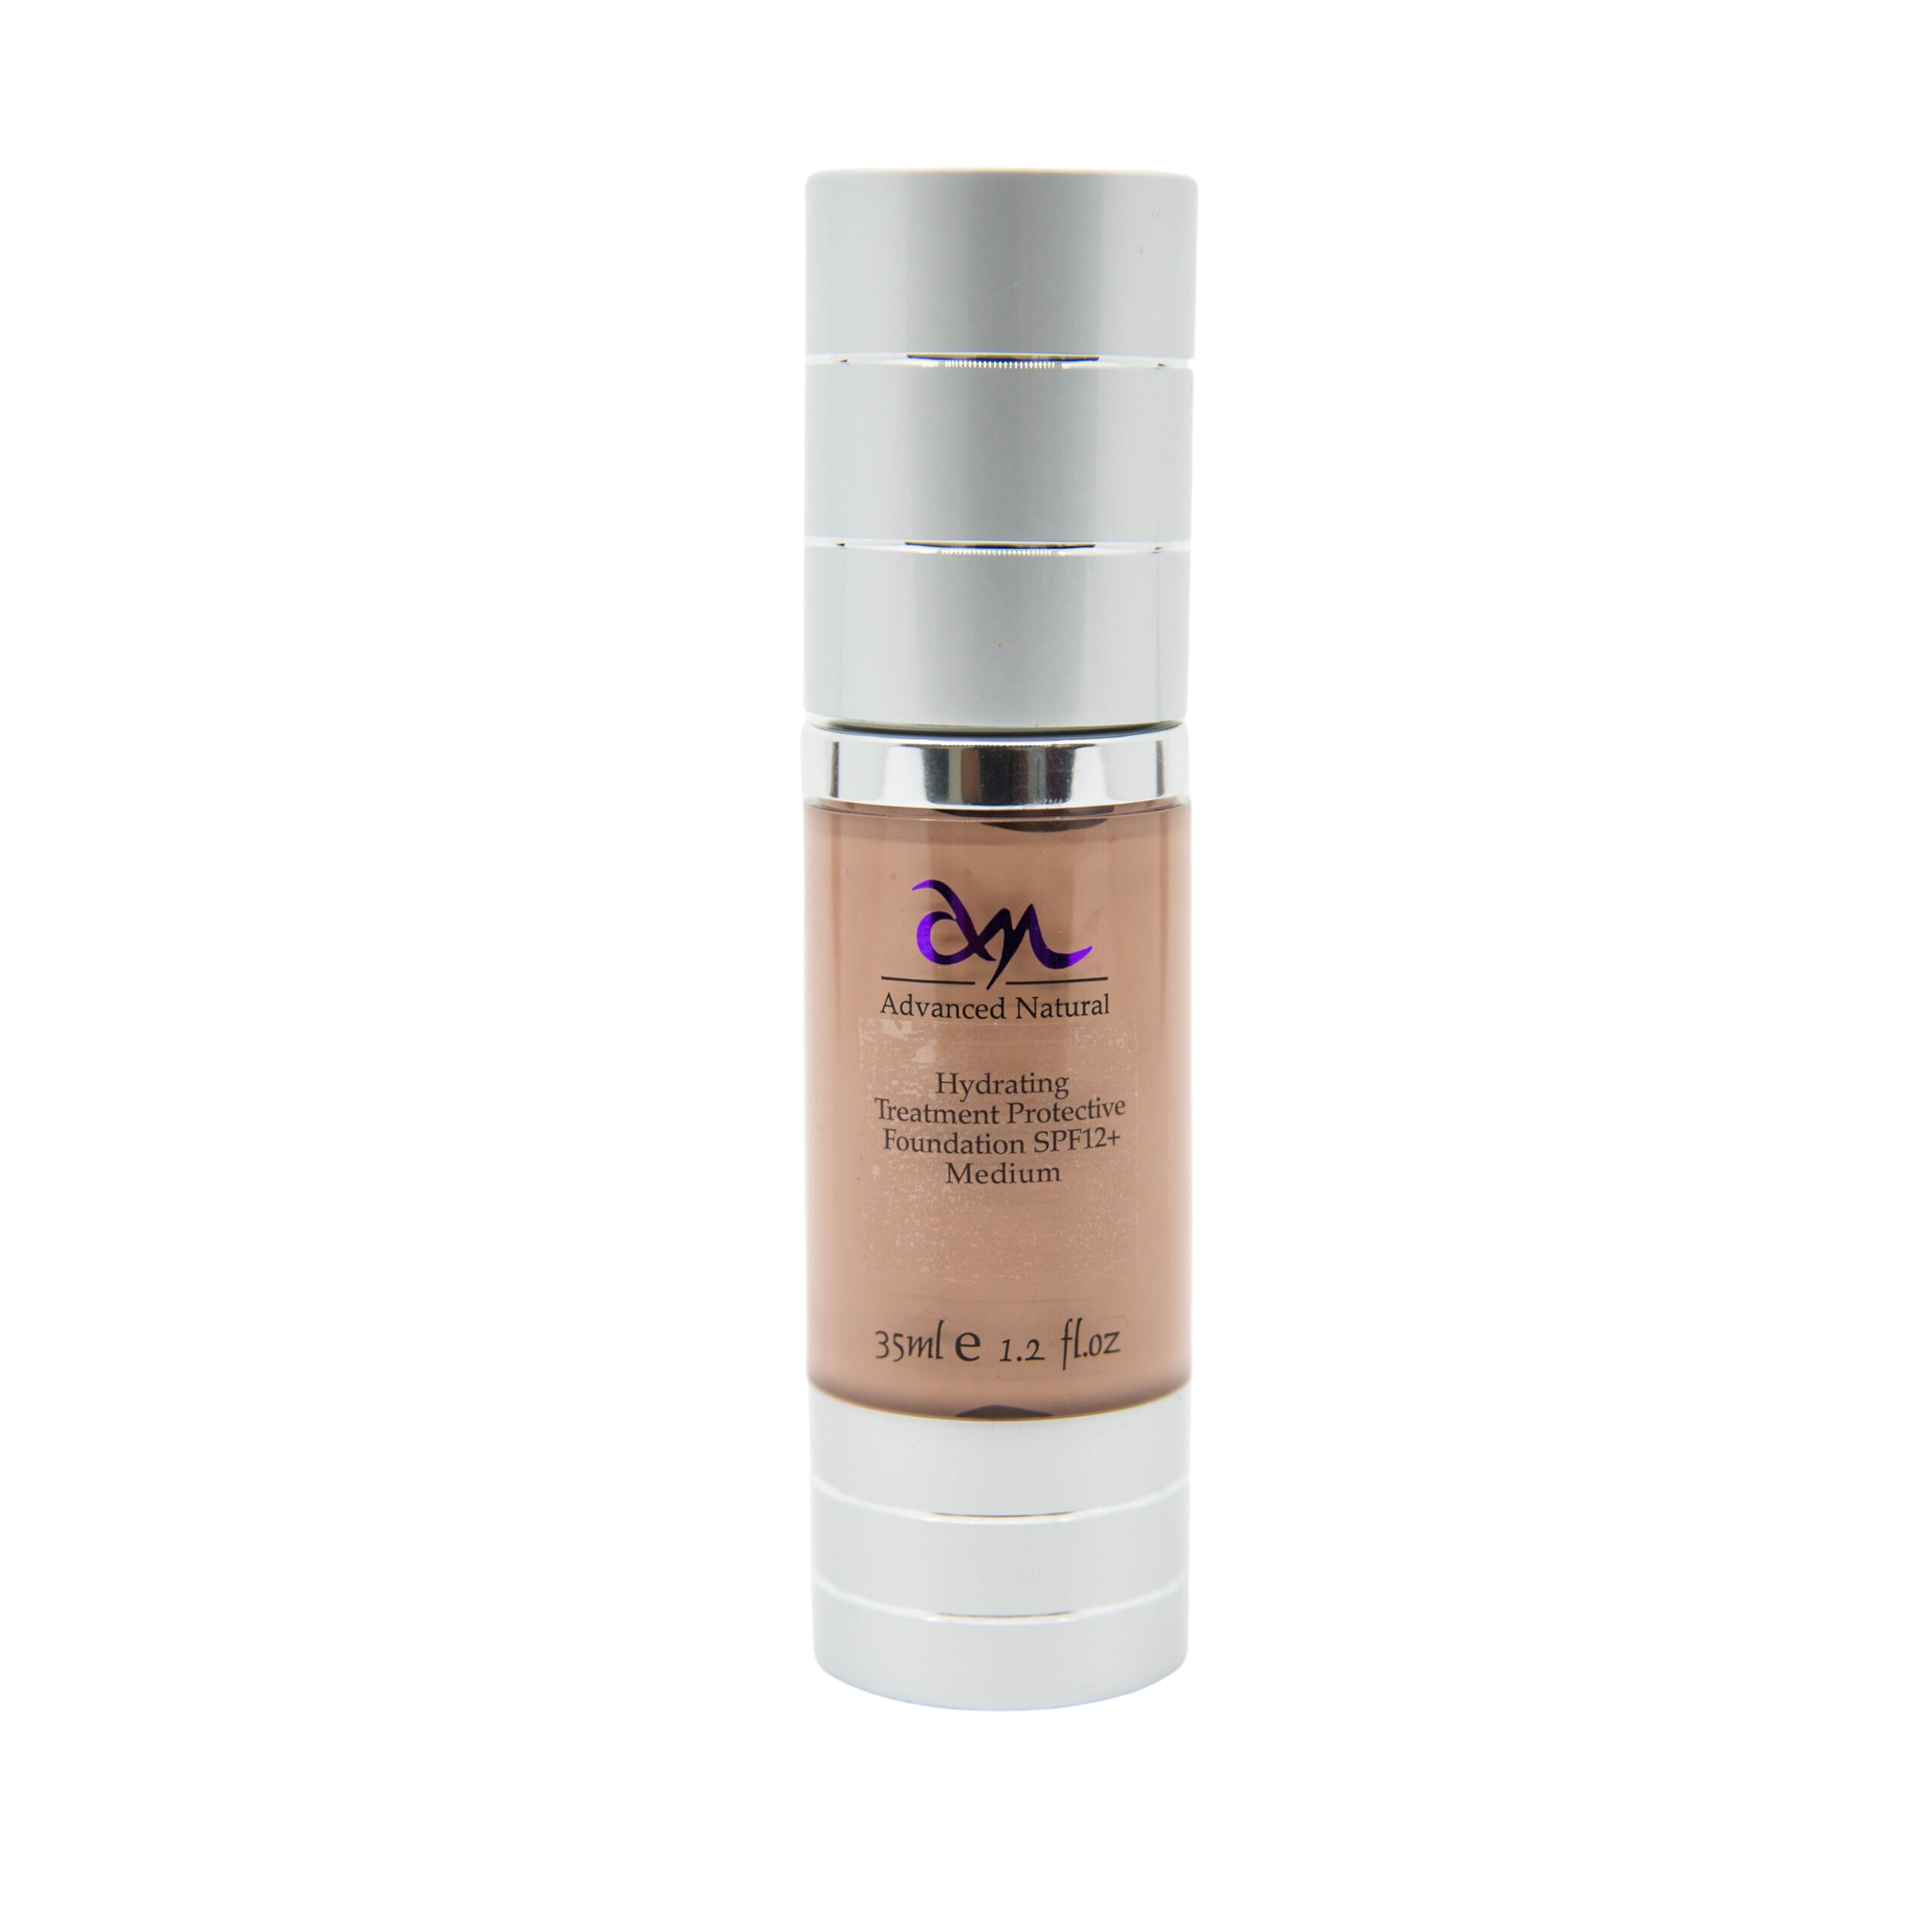 Hydrating Treatment Protective Foundation SPF 12+